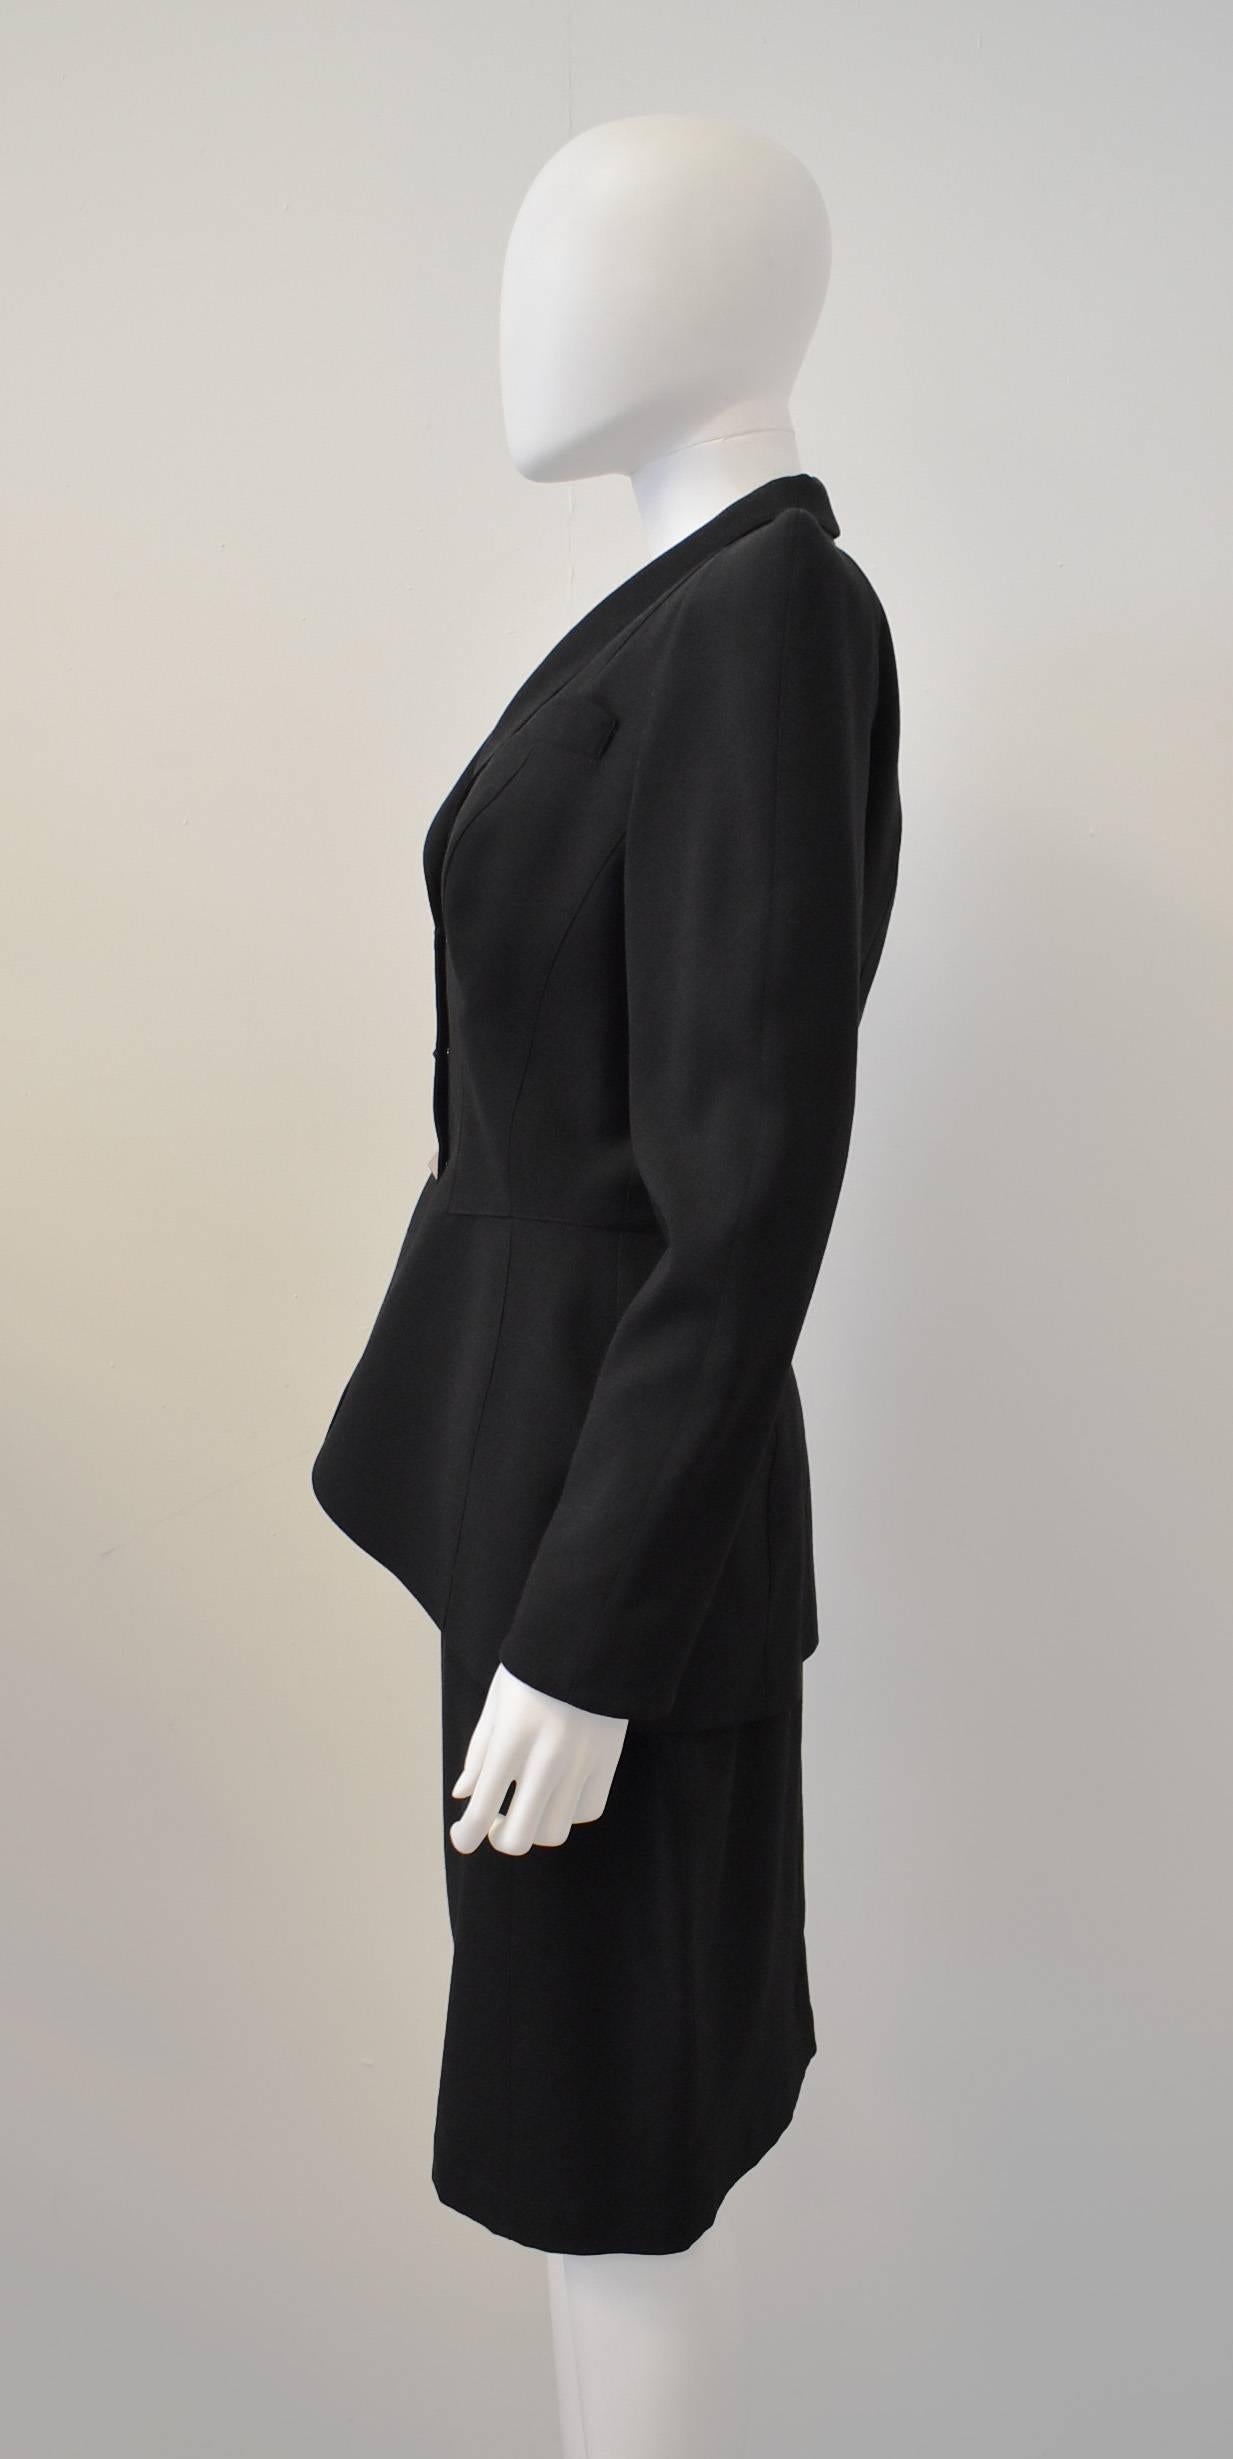 A black vintage skirt suit from legendary designer Thierry Mugler. Featuring his signature exaggerated 1940’s silhouette; with cinched in waist, and large pointed shoulder pads, the suit is a classic Mugler ensemble. Dating from the 1980’s the suit